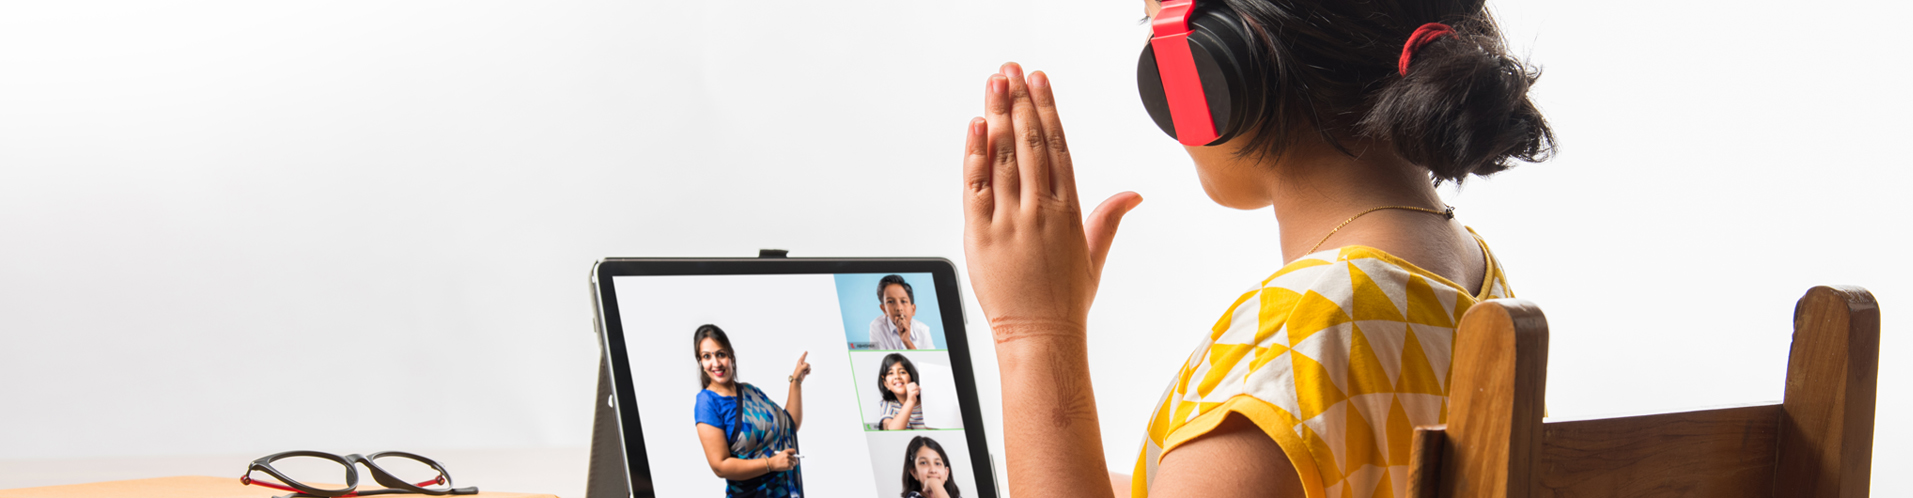 The Importance of Technology Integration in Education for Your Child's Academic Growth